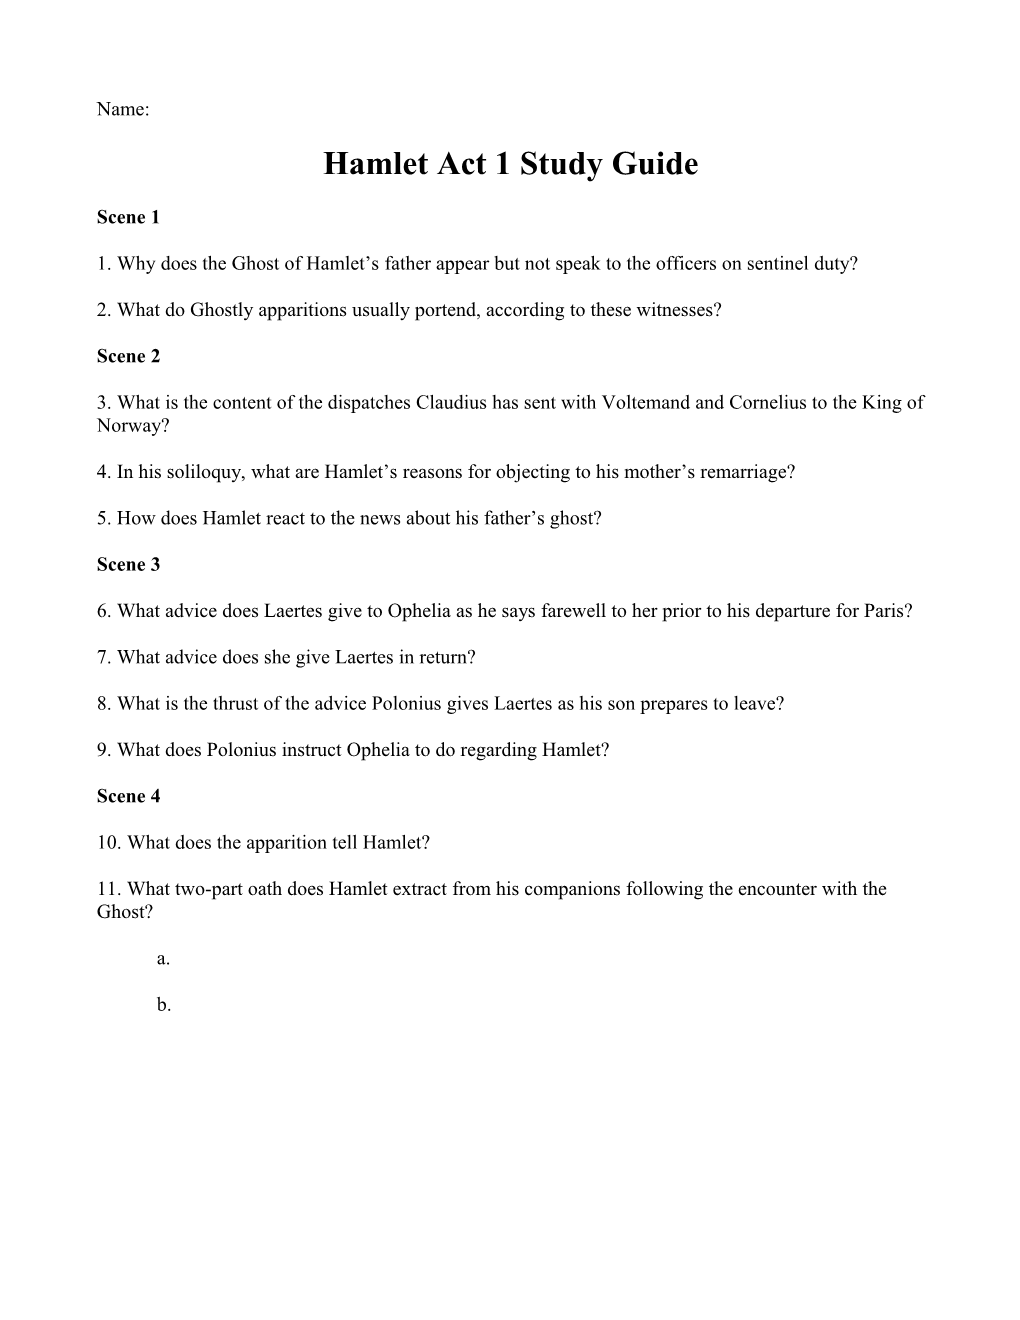 Hamlet Act 1 Study Guide